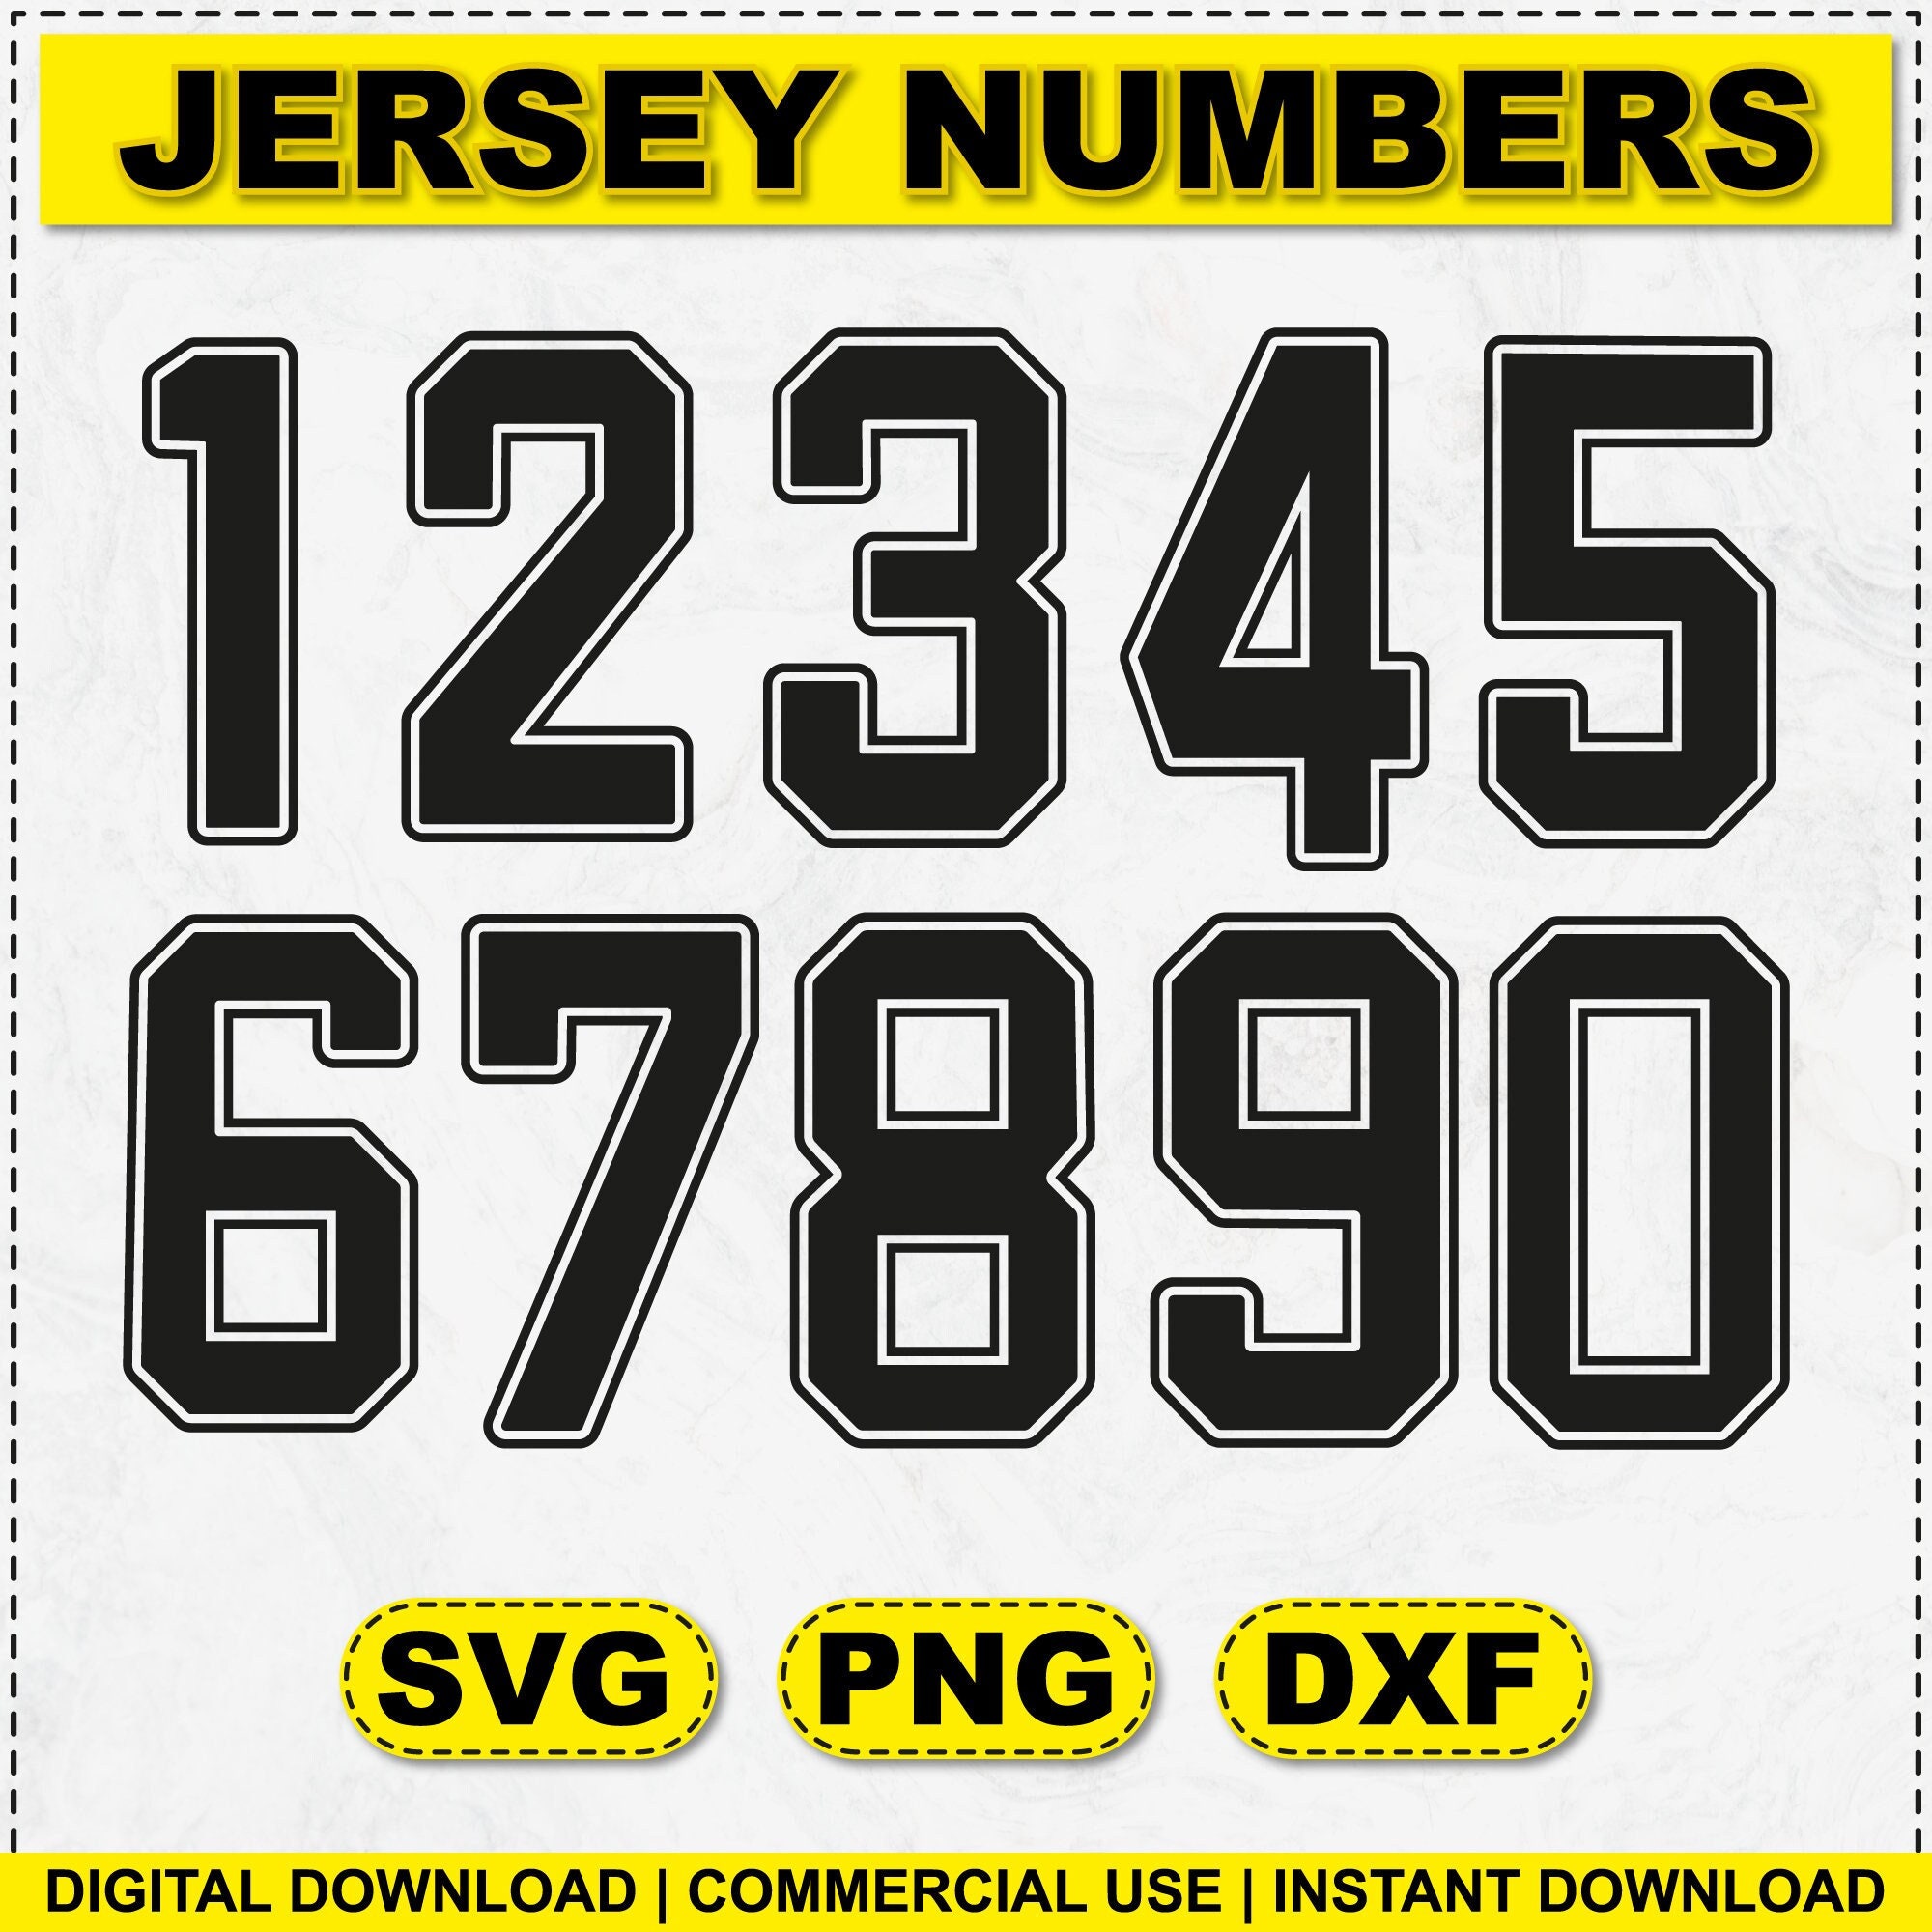 SPORTONUM - Jersey Numbers and Tall Display font